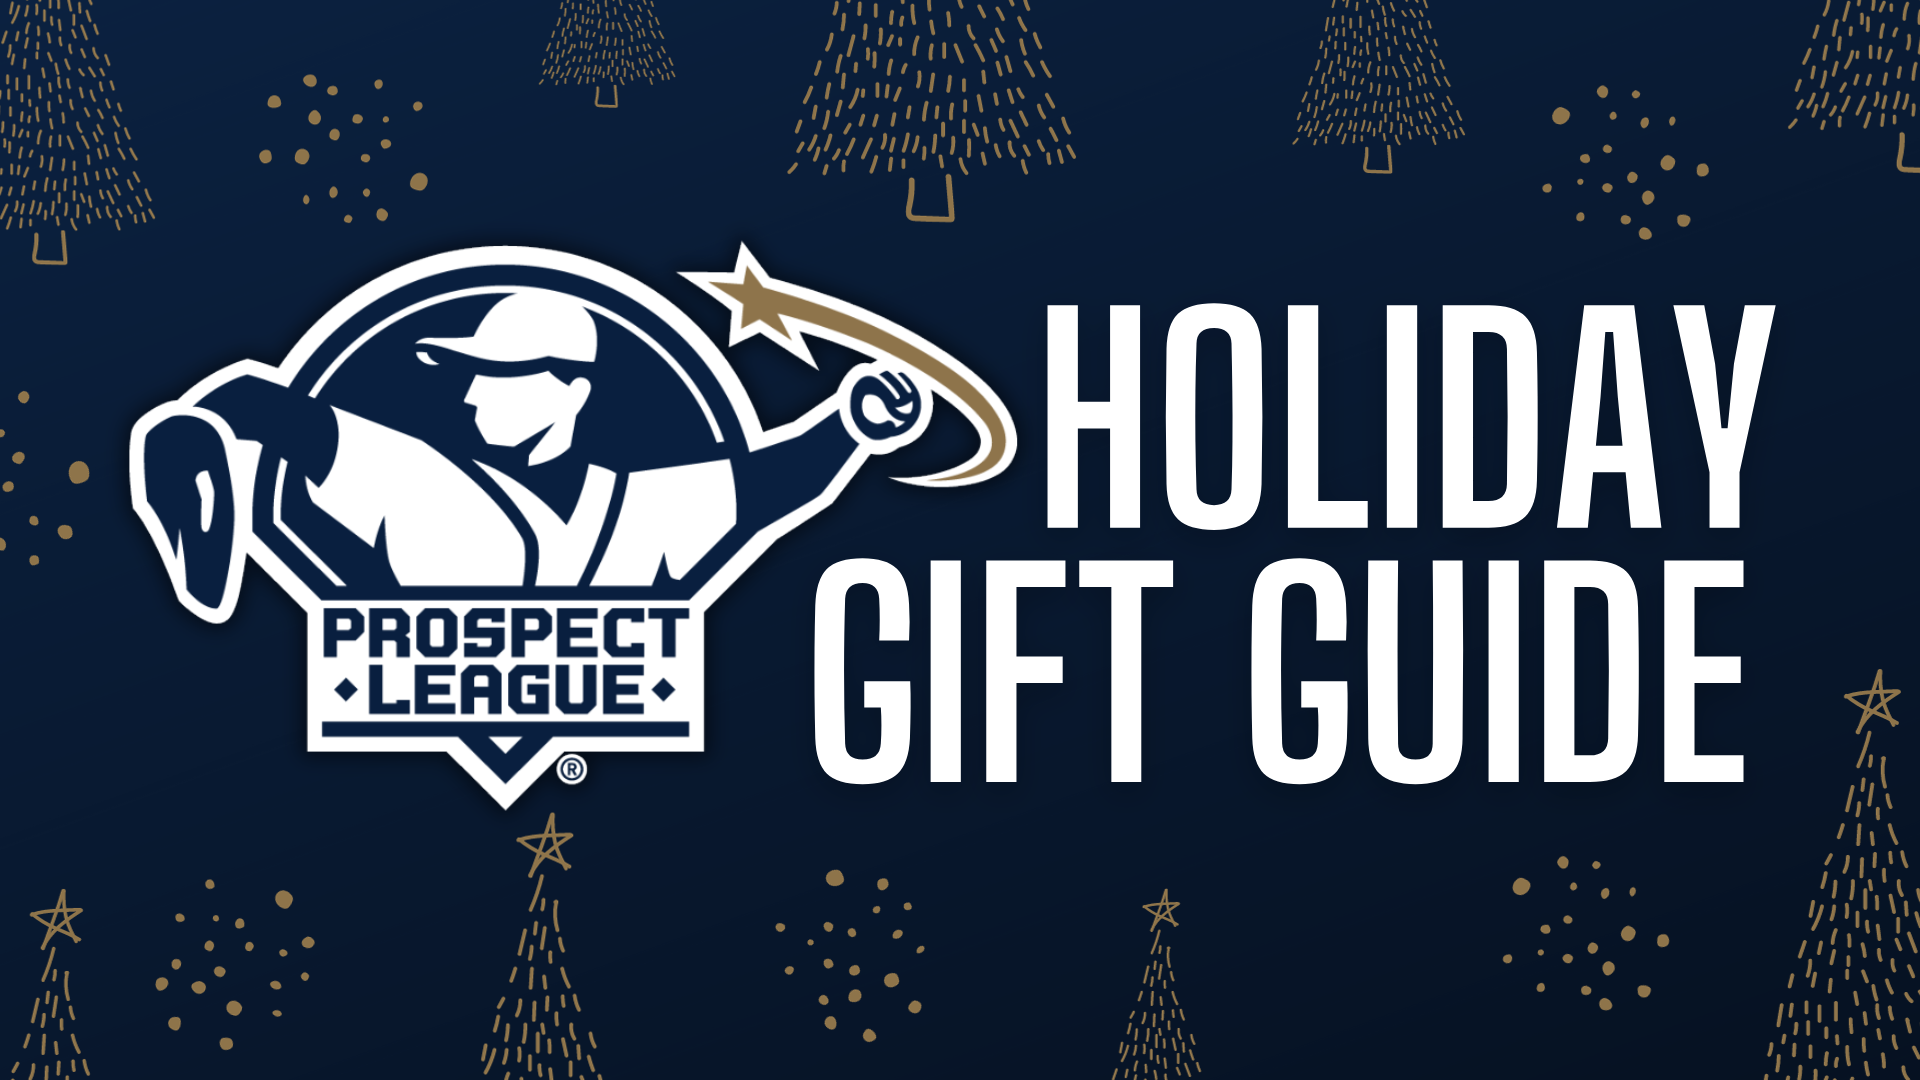 Holiday Gift Guide: Best Gifts From Each Prospect League Team